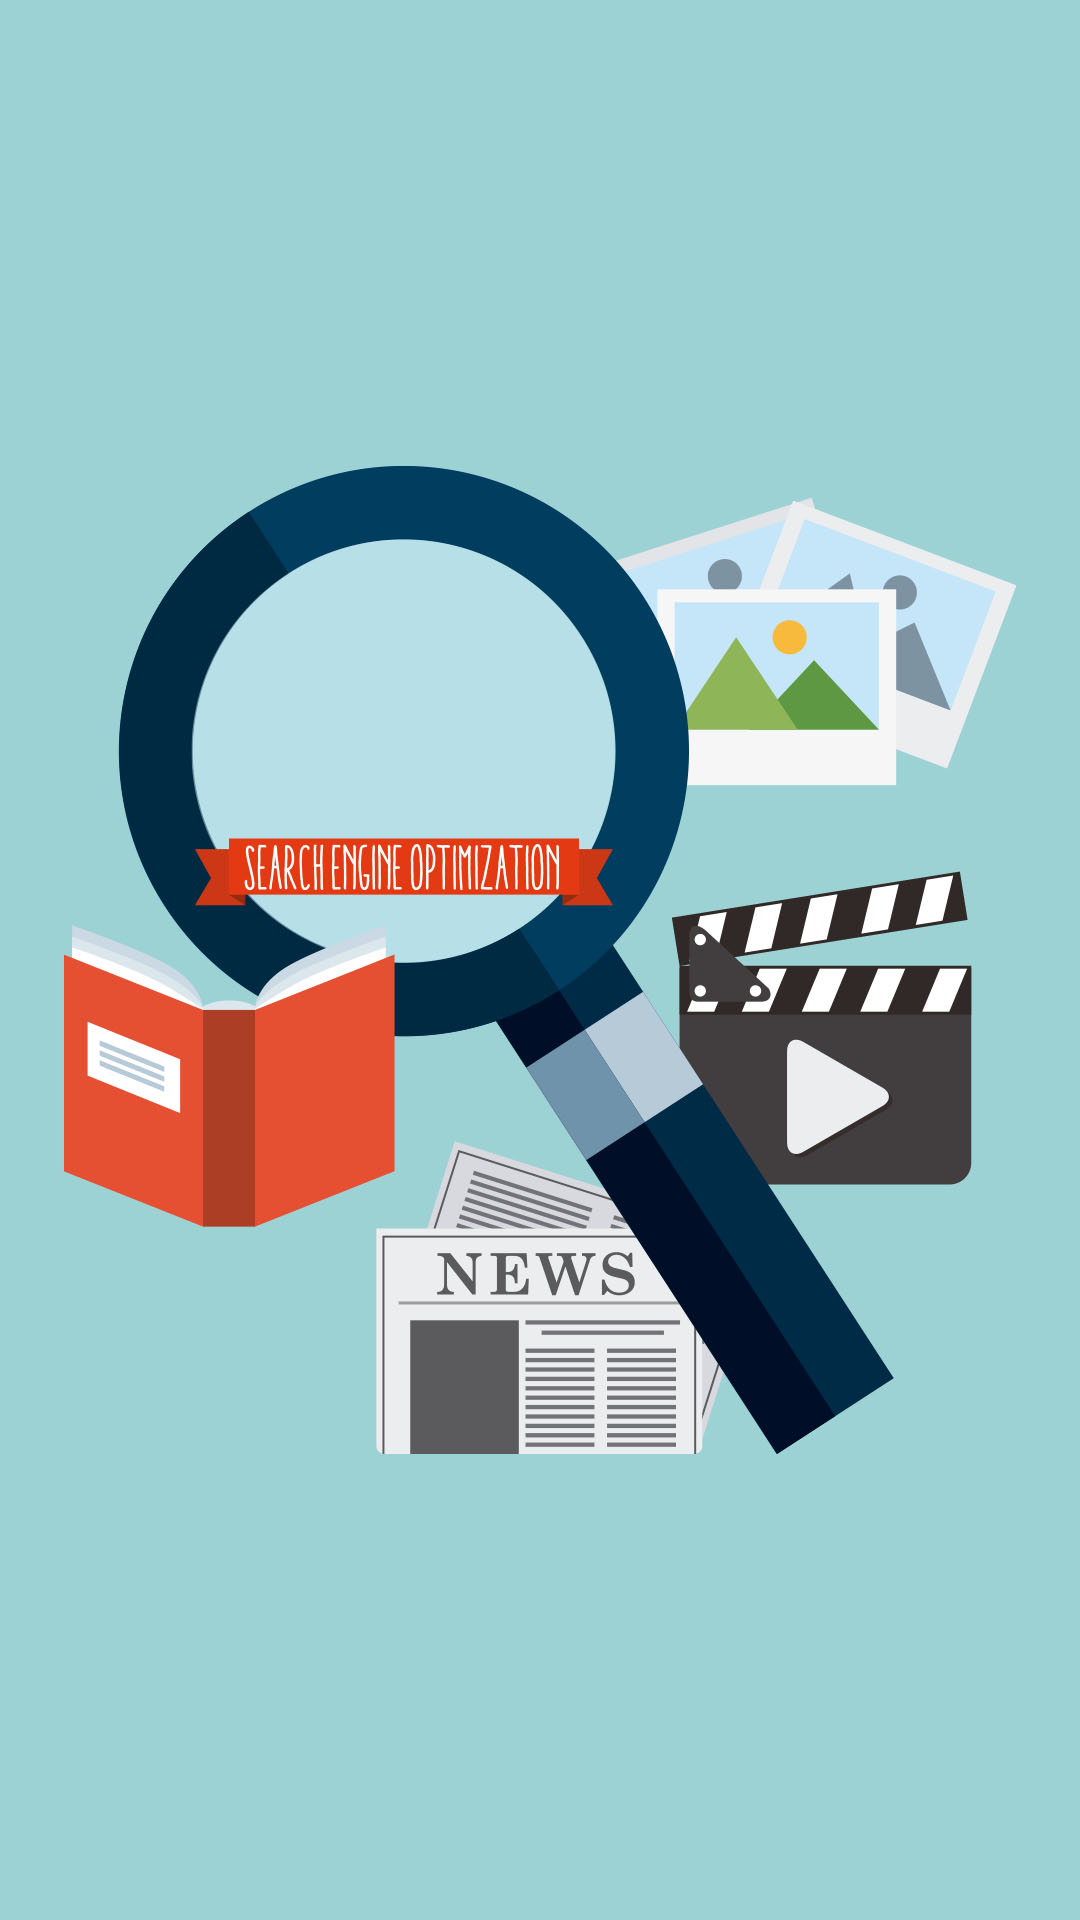 What is Film search Engine?